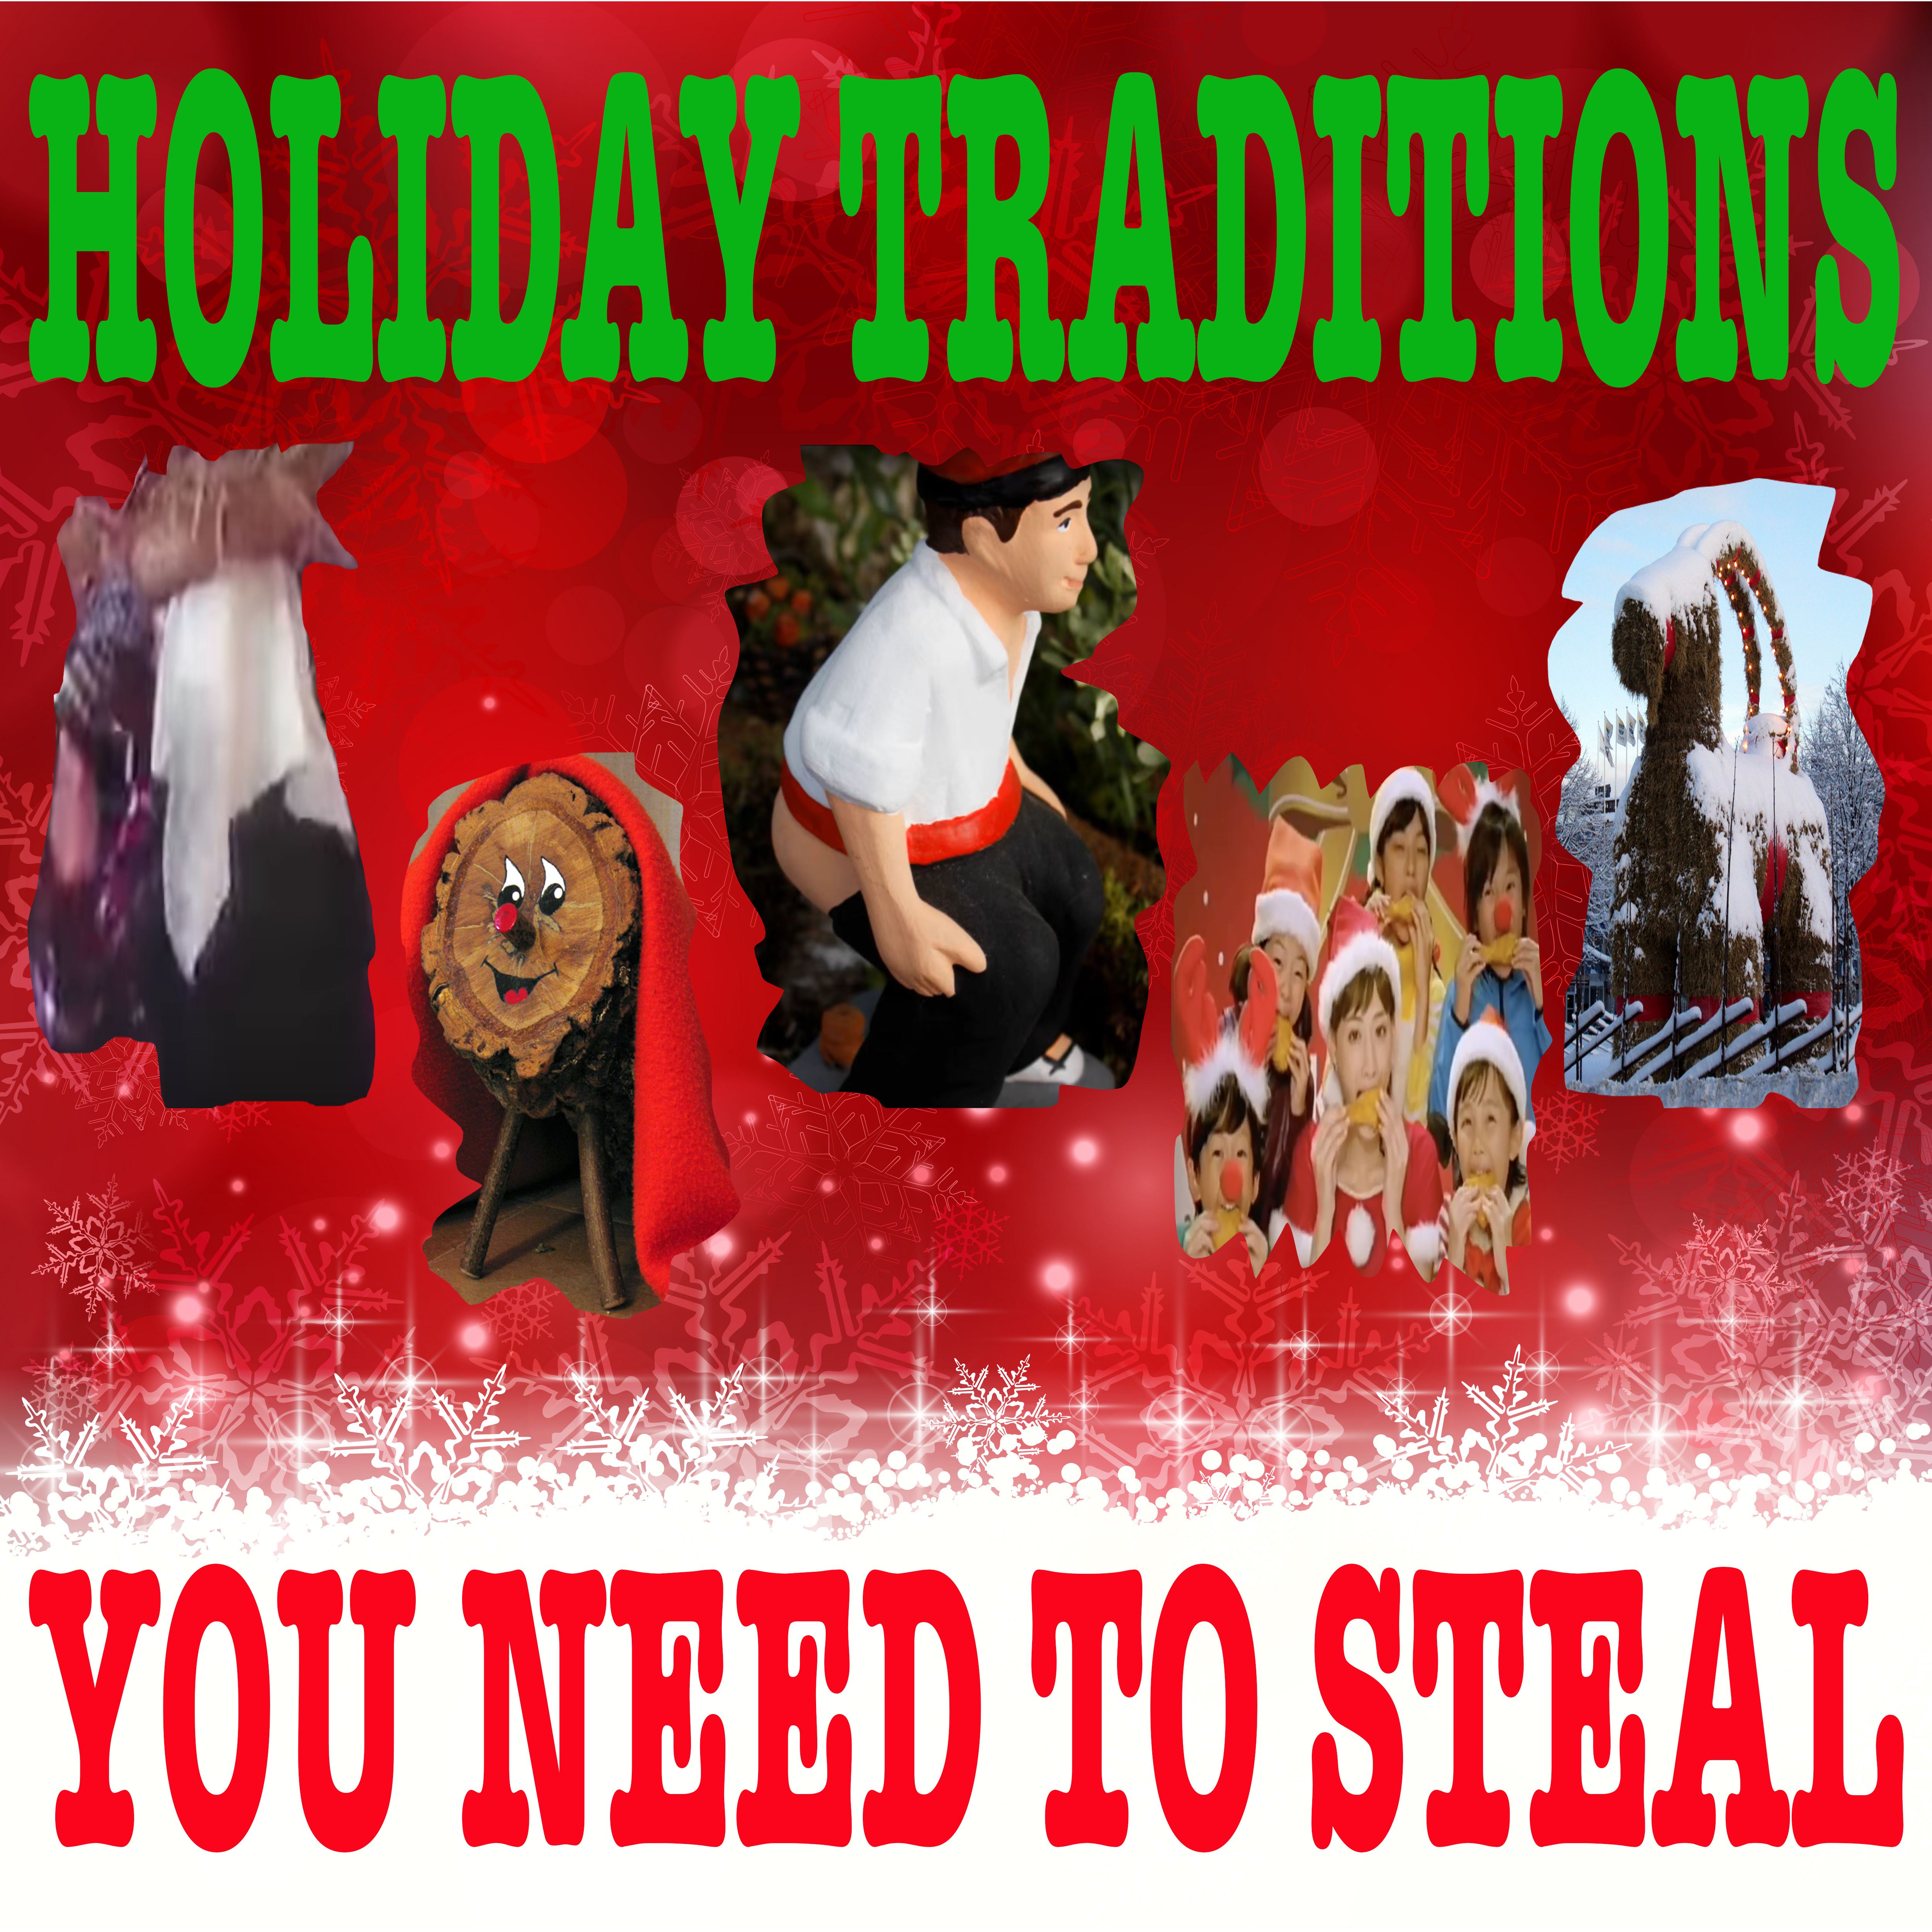 Five Weird Traditions You Need To Steal This Holiday Season